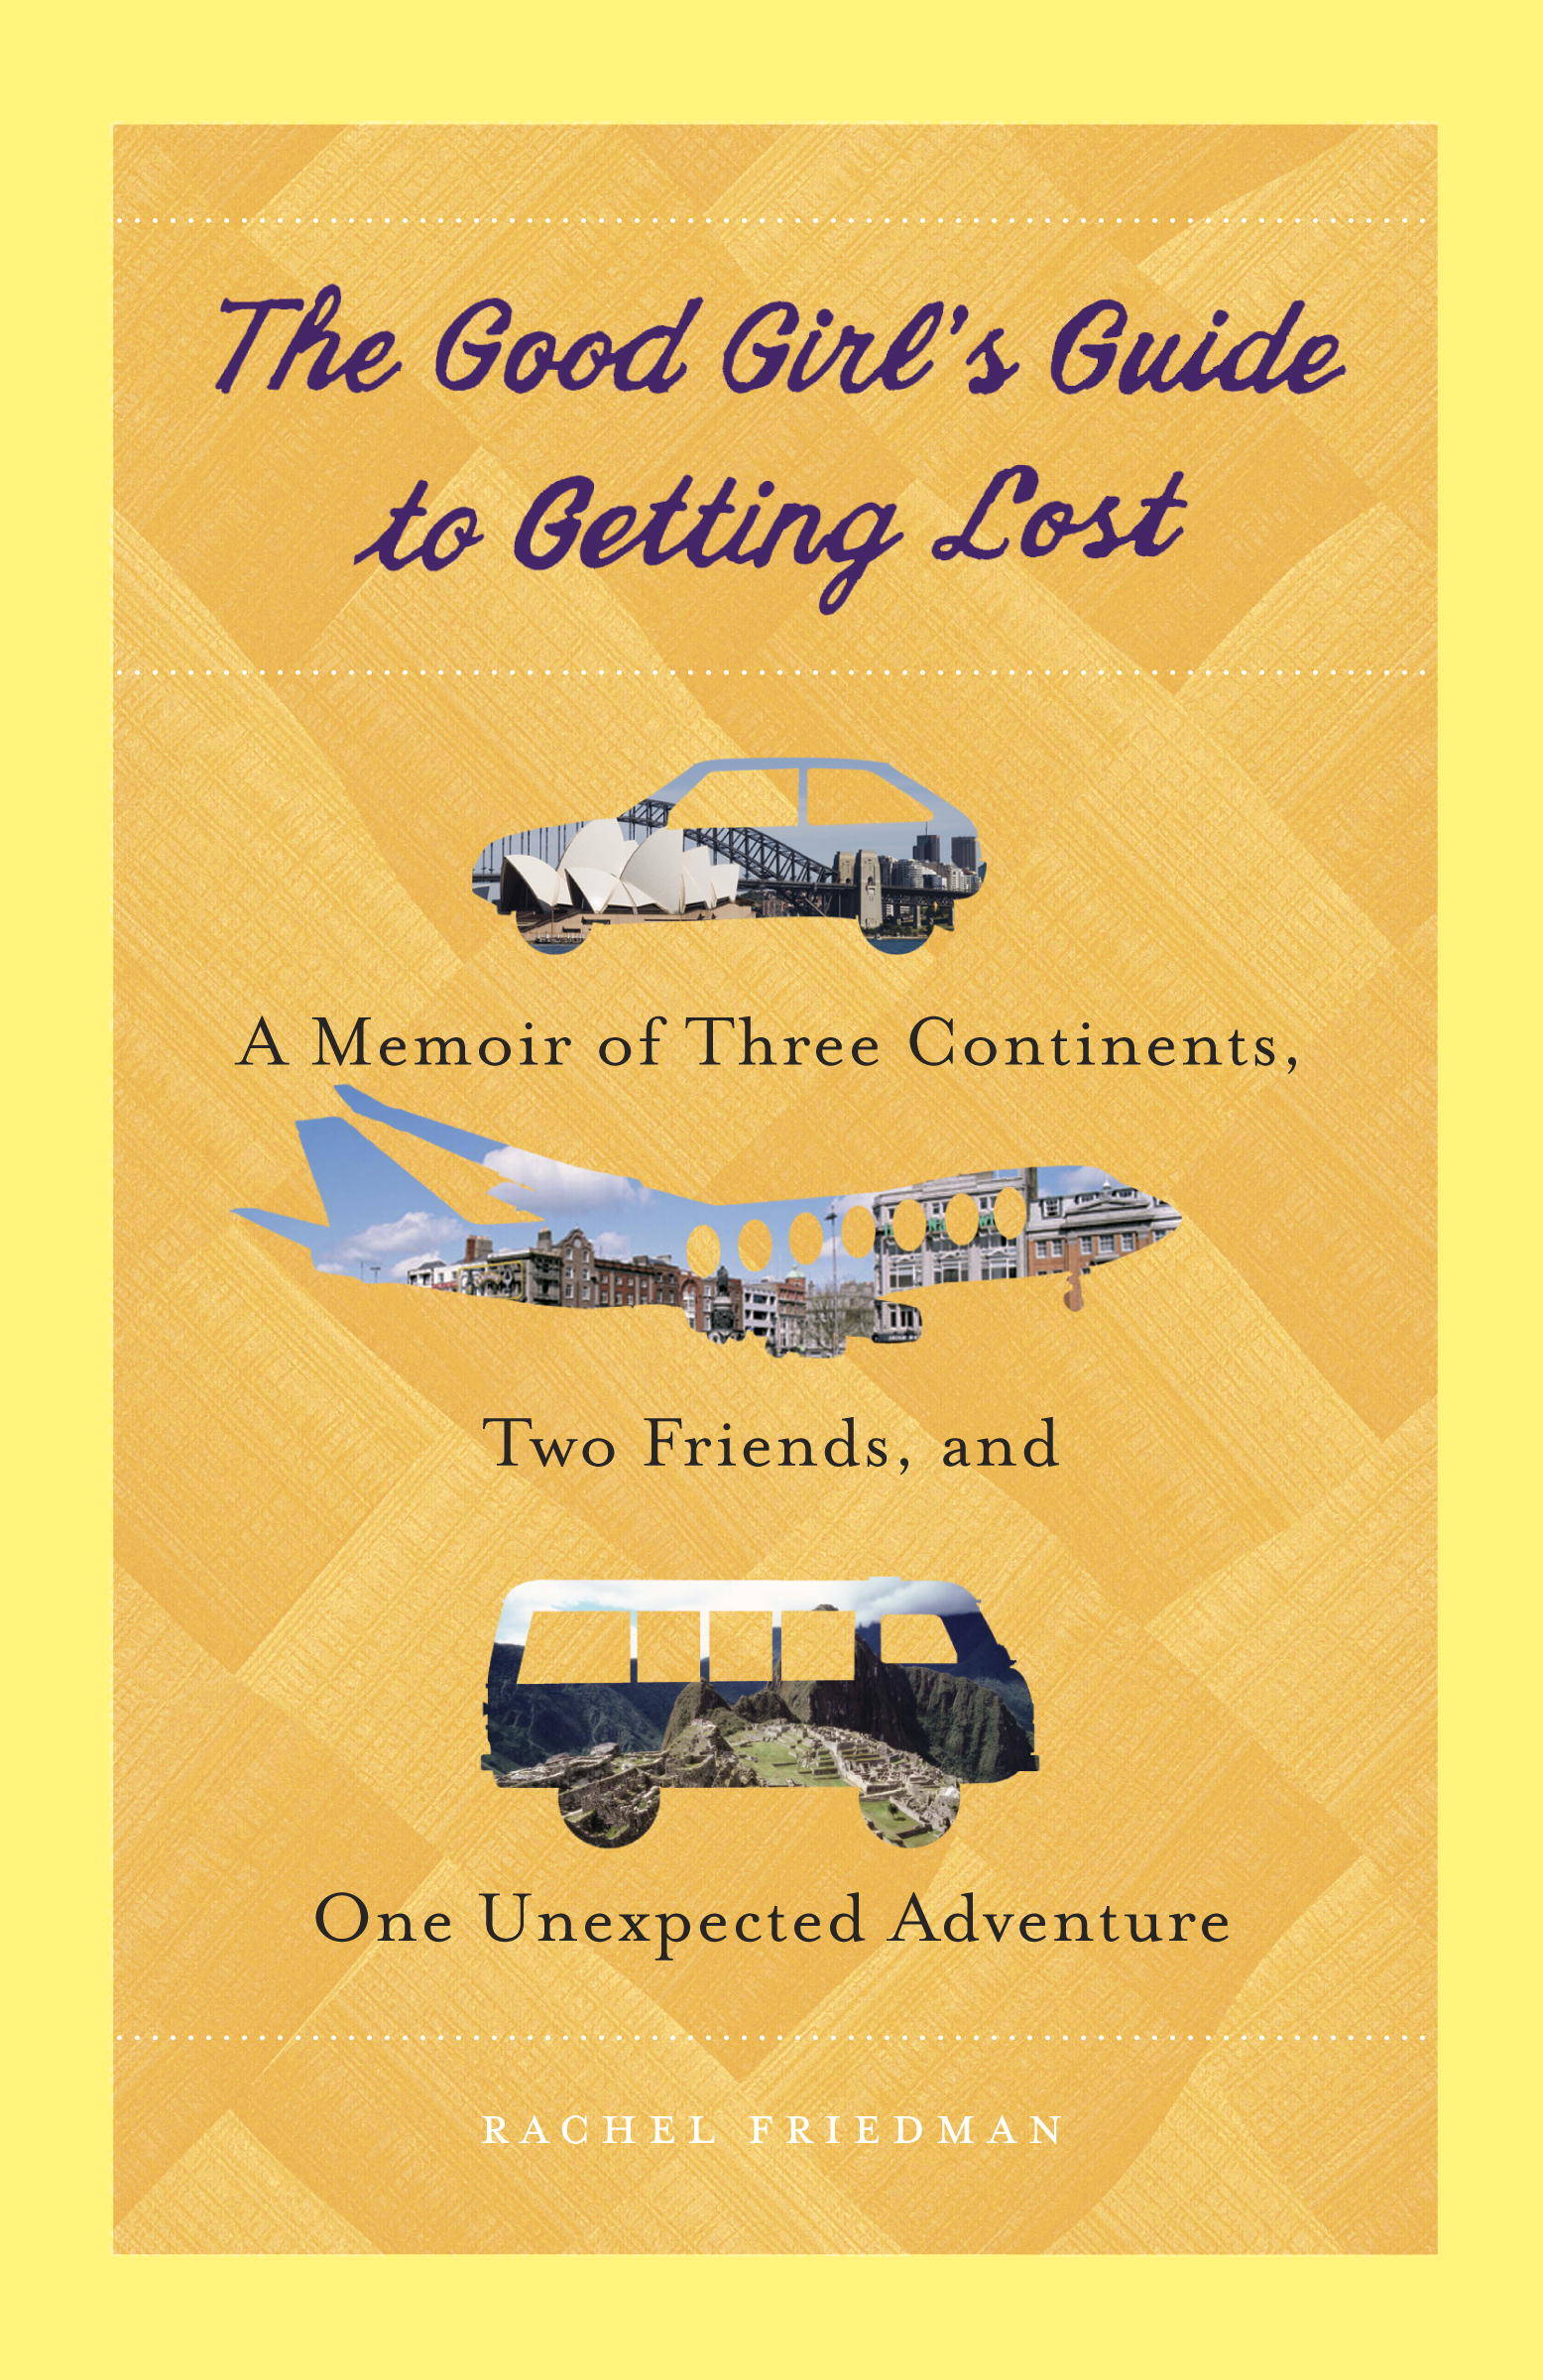 The Good Girl's Guide To Getting Lost